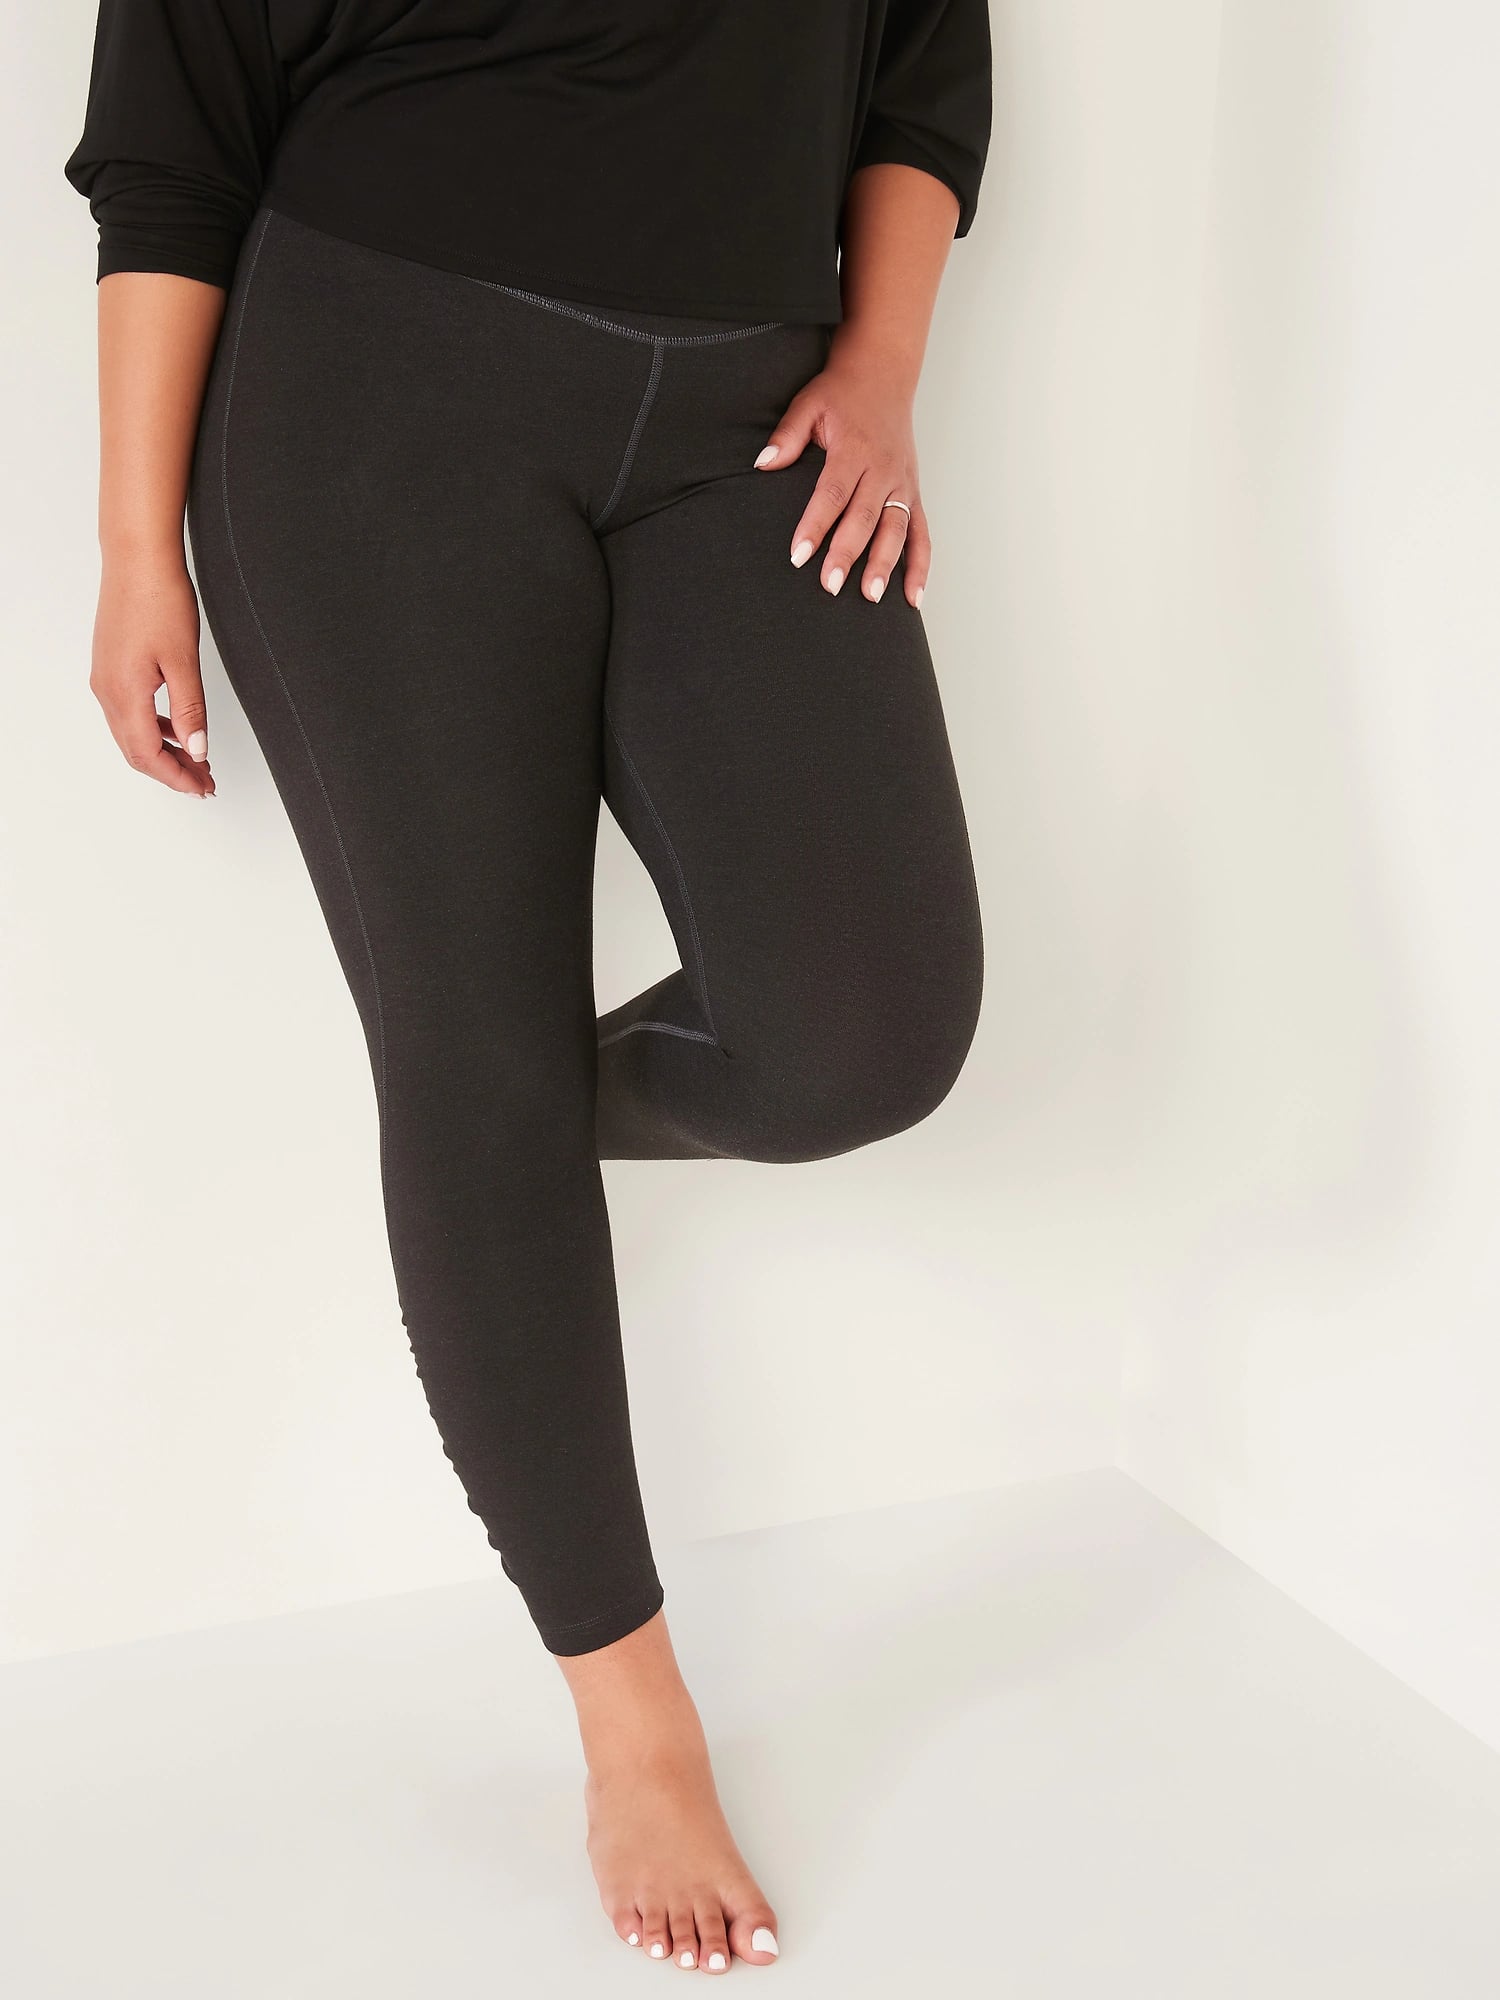 Old Navy Extra High-Waisted PowerChill Ruched 7/8-Length Leggings — Carbon, Trust Me, These Are the Best Petite Leggings When You Want Something Soft  That Stays Up